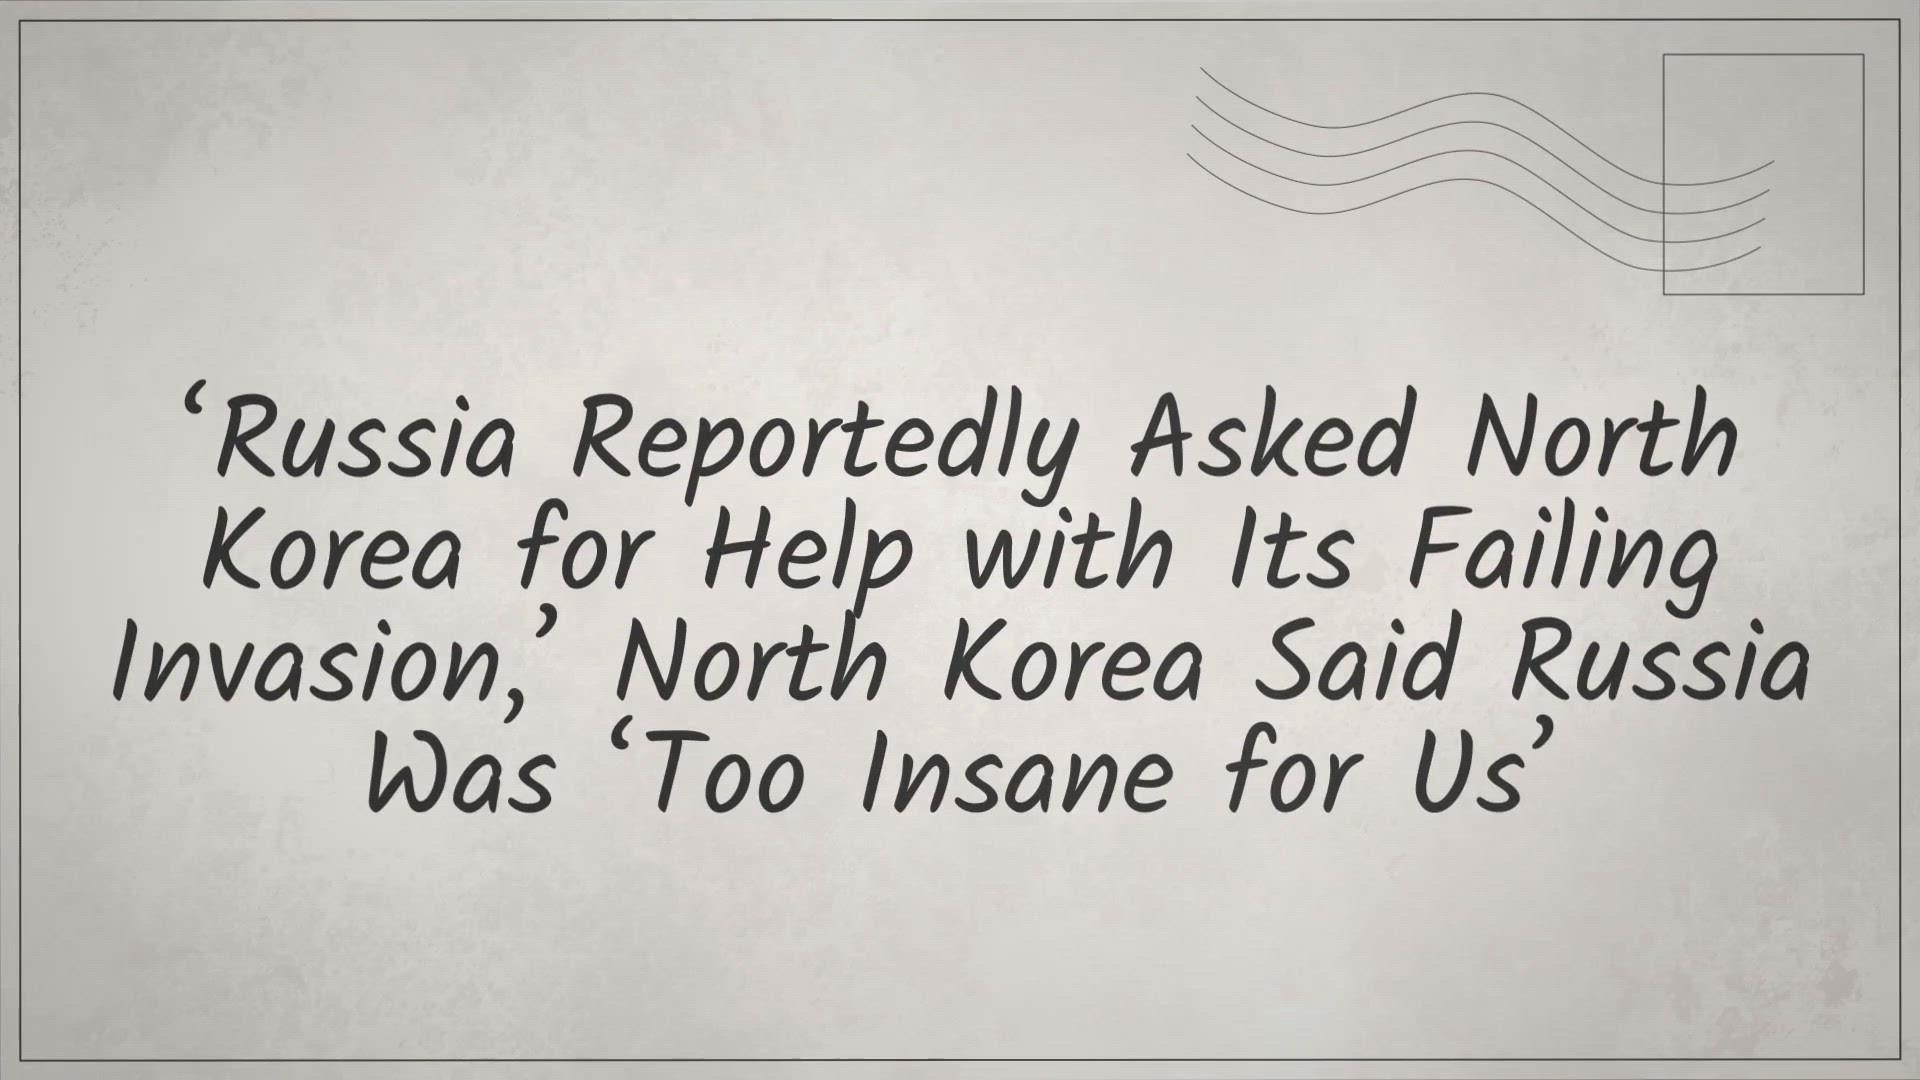 'Video thumbnail for ‘Russia Reportedly Asked North Korea for Help with Its Failing Invasion,’ North Korea Said Russia Was ‘Too Insane for Us’'